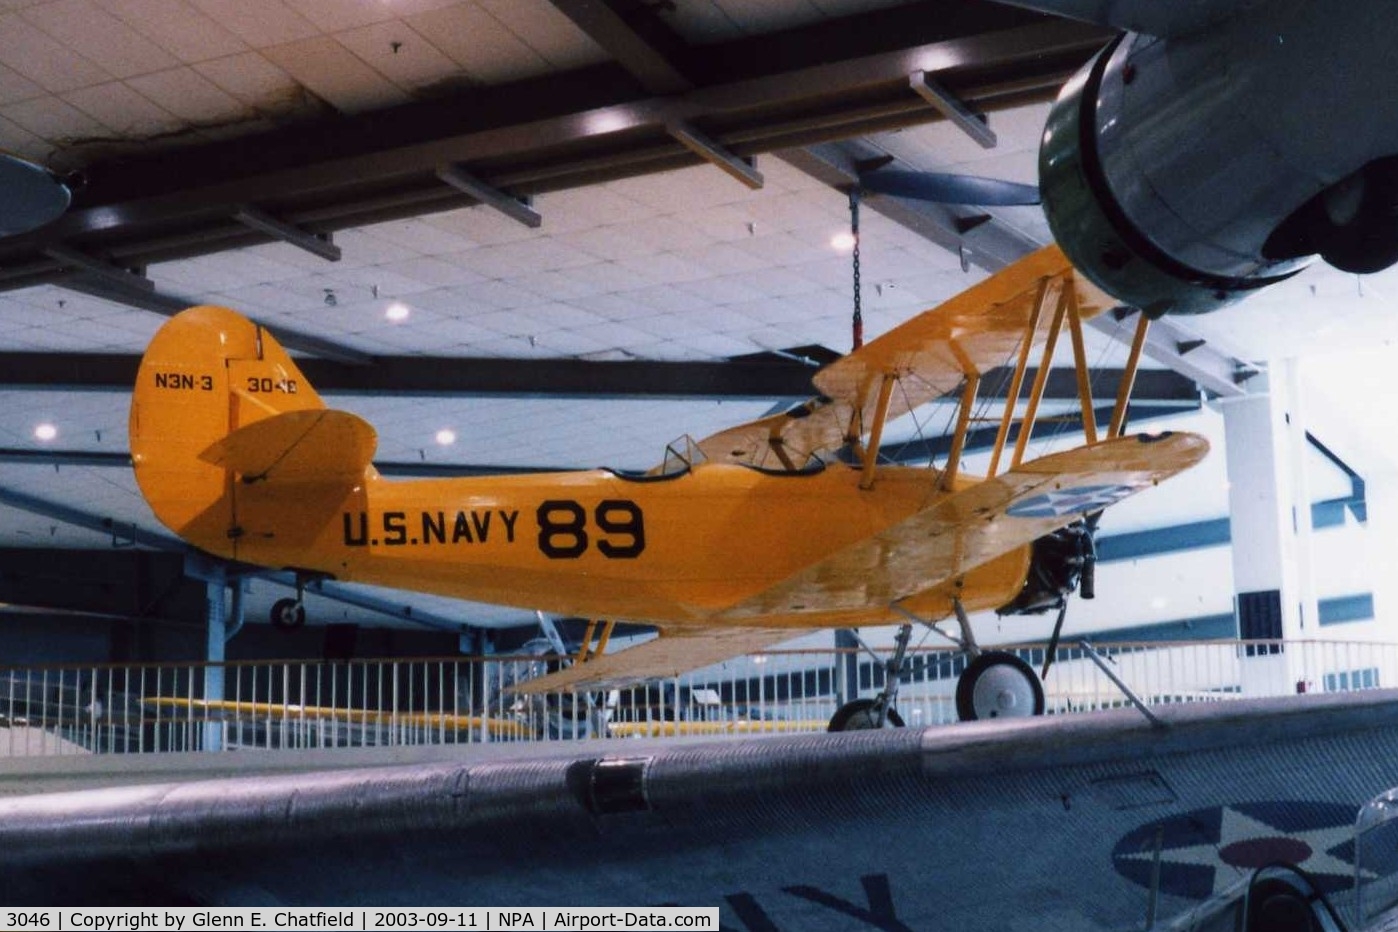 3046, Naval Aircraft Factory N3N-3 C/N Not found 3046, Yellow Peril at the National Museum of Naval Aviation